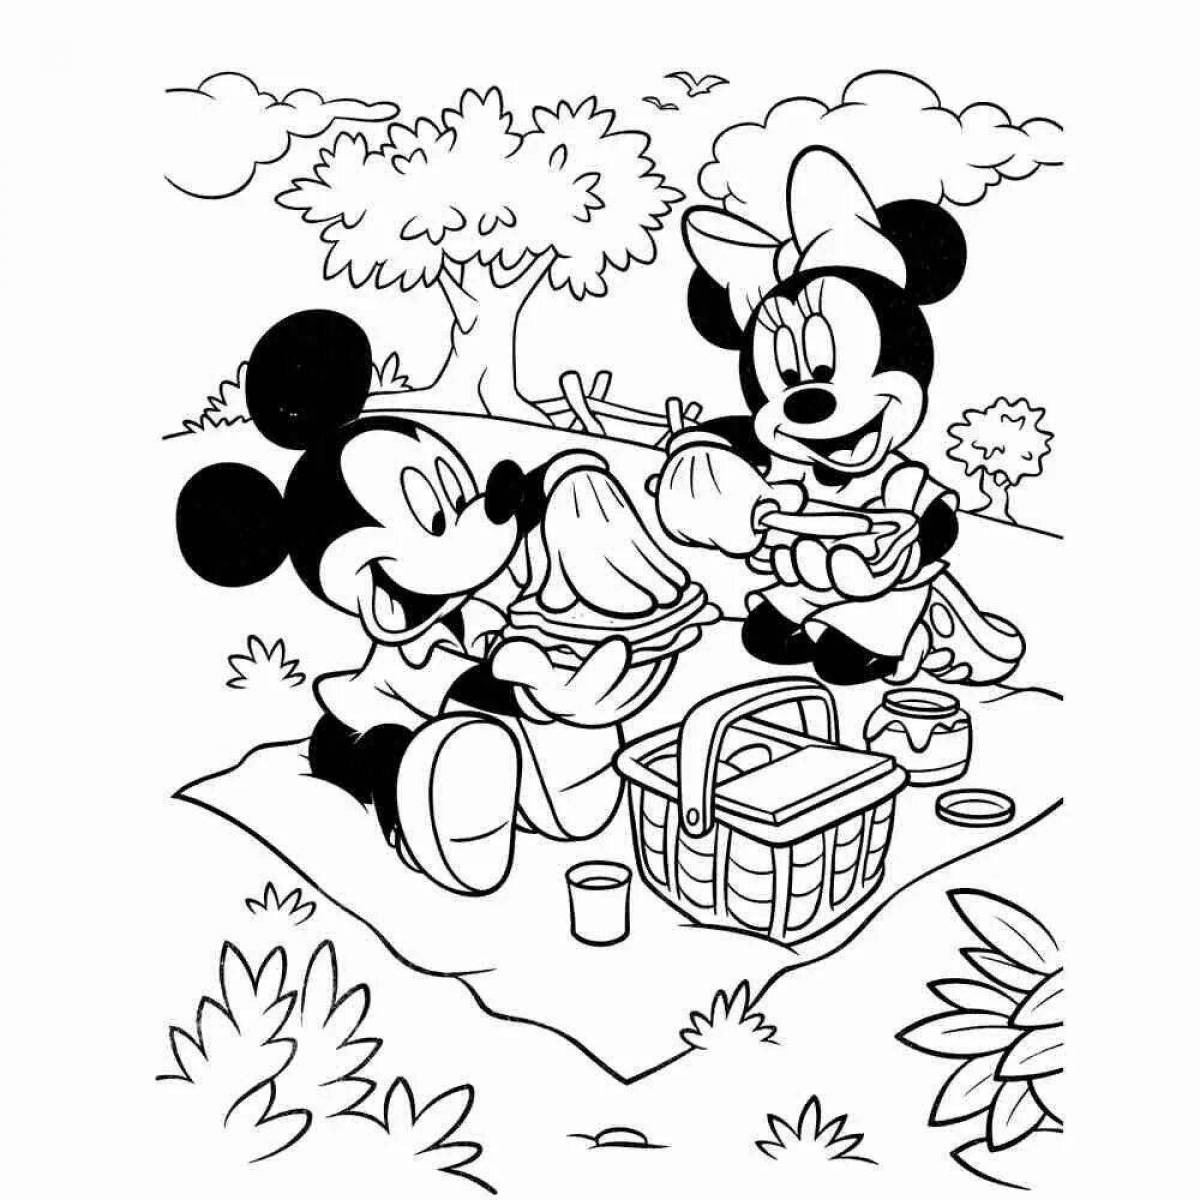 Mickey's amazing coloring book